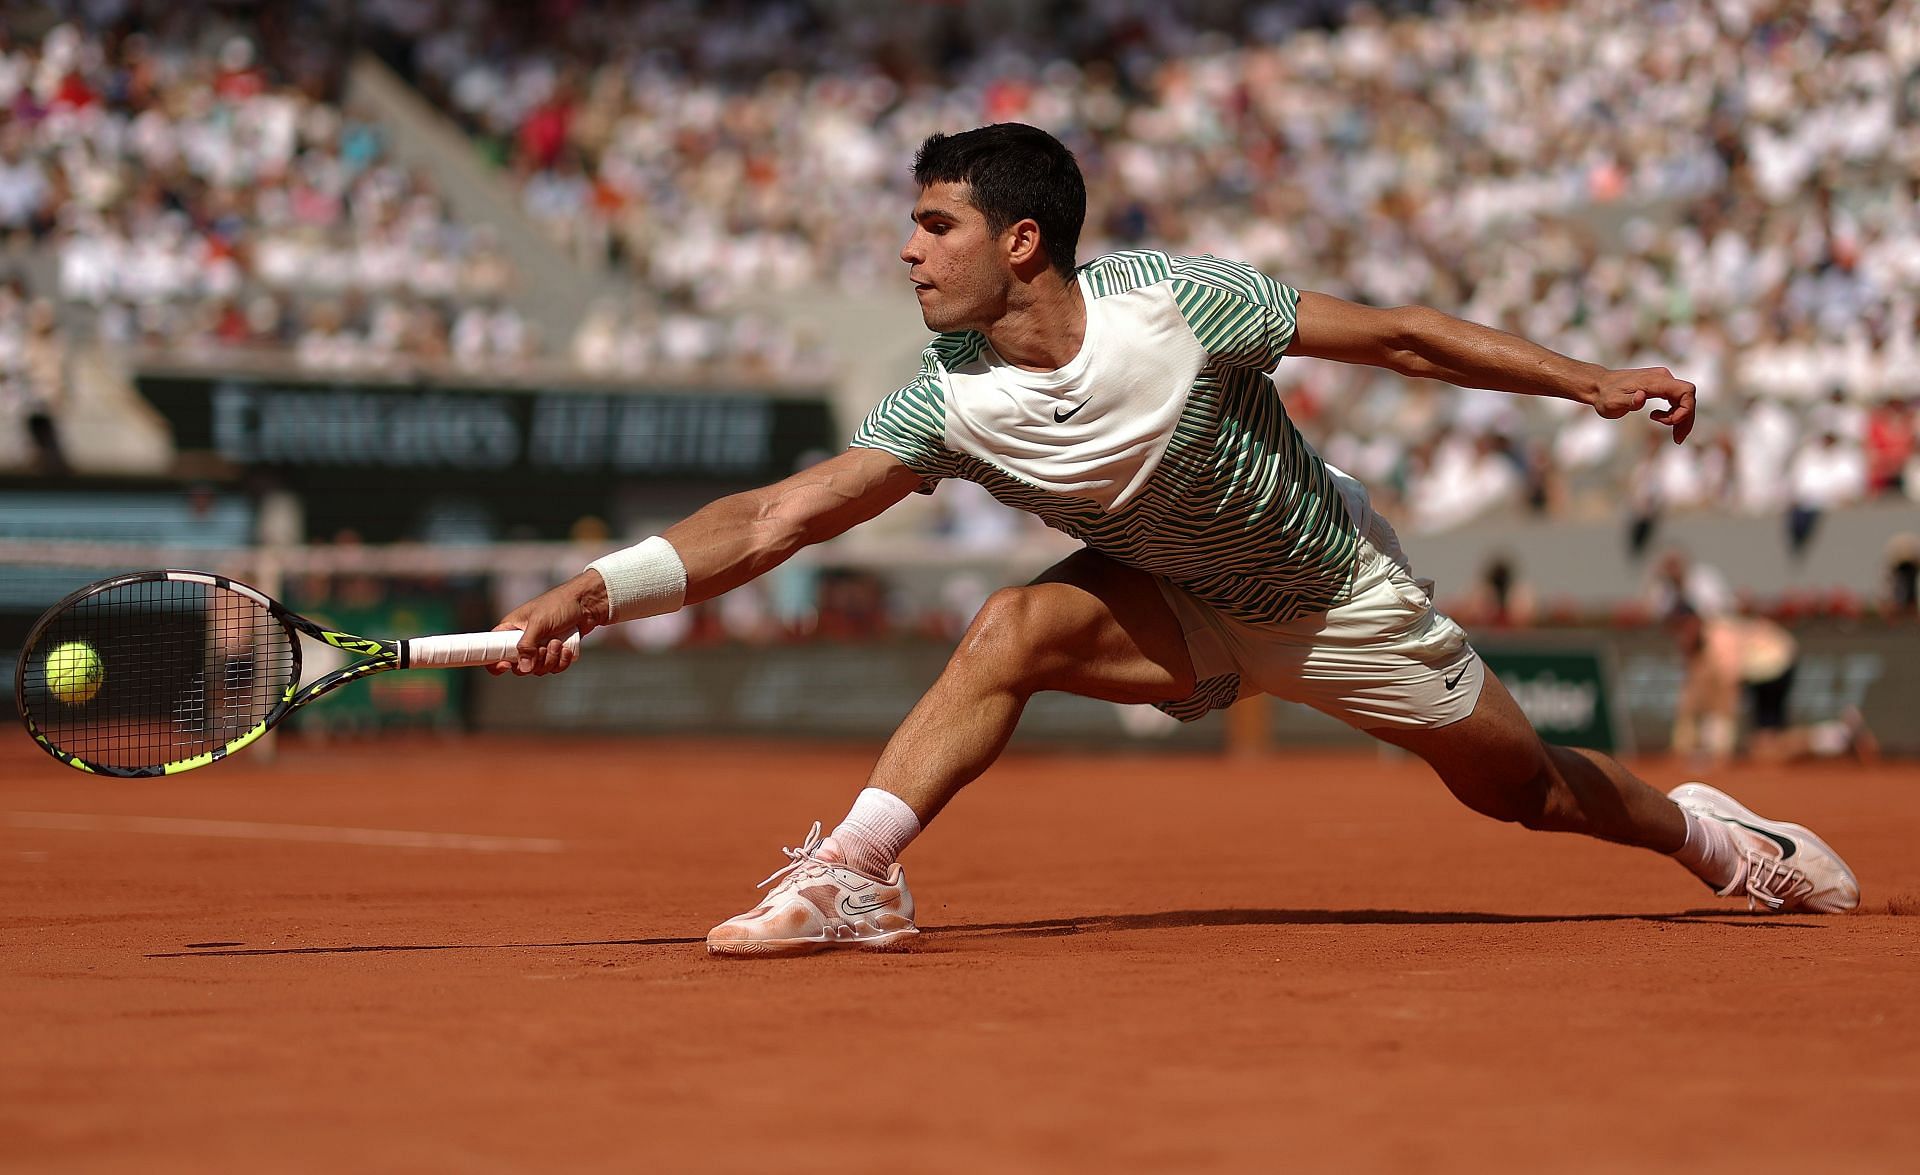 Carlos Alcaraz in action at the 2023 French Open.